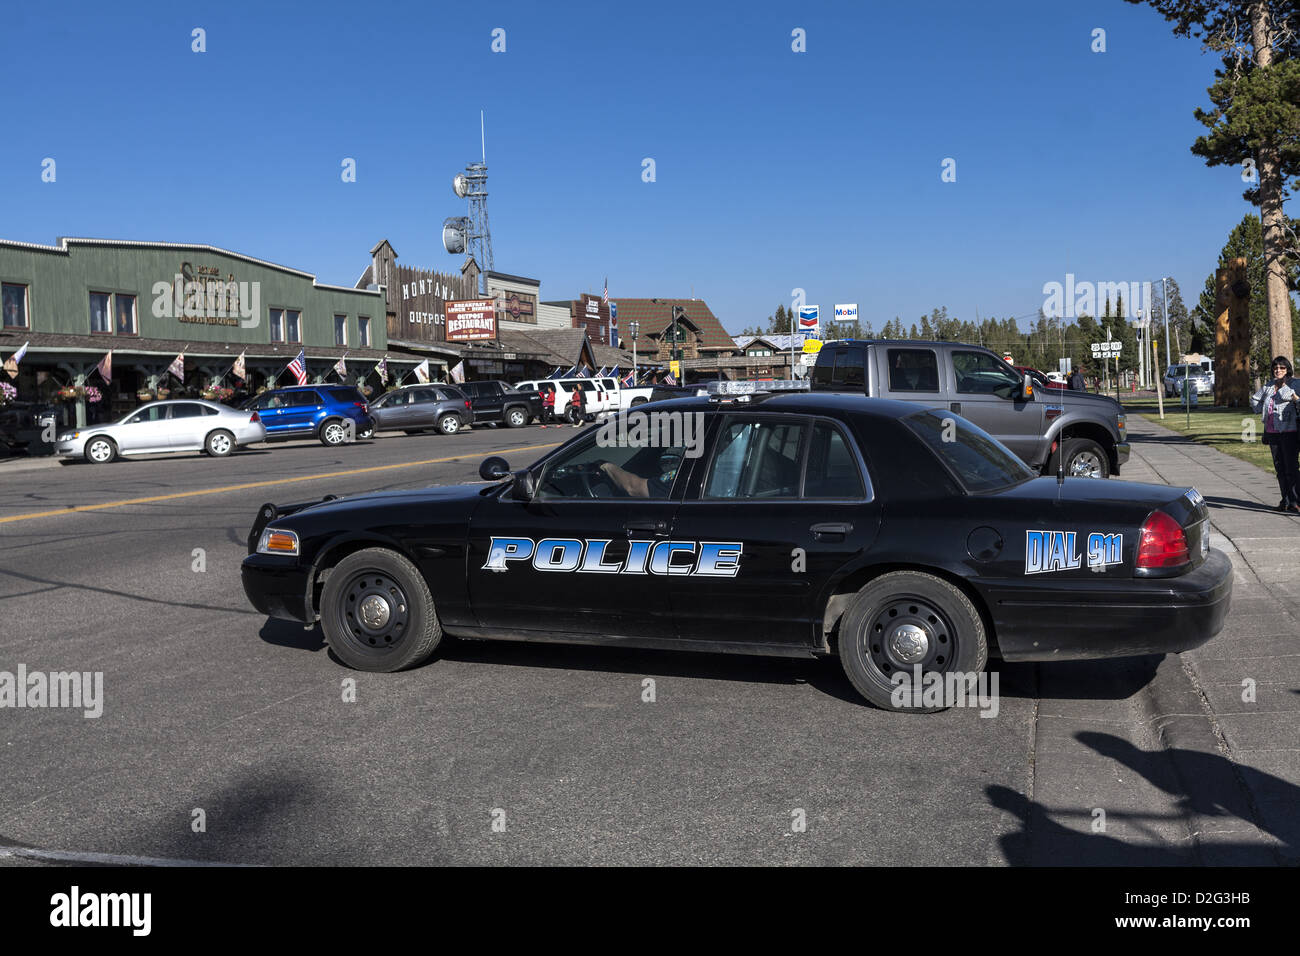 Police car parked in street in West Yellowstone, Montana, USA Stock Photo